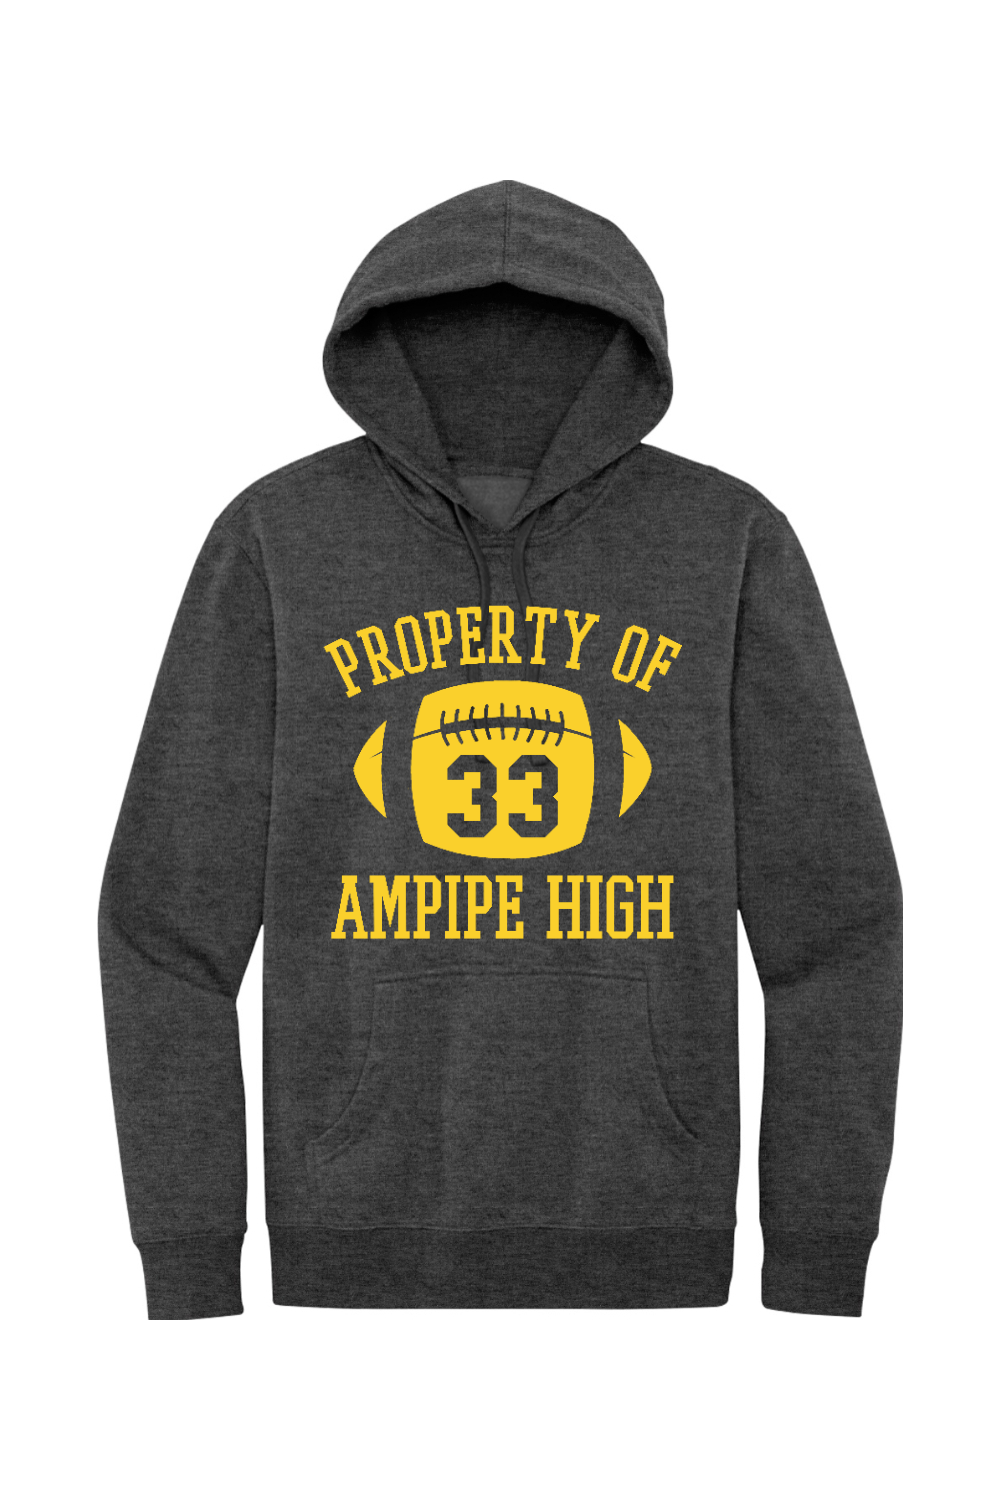 Property of Ampipe High (All the Right Moves)- Fleece Hoodie - Yinzylvania